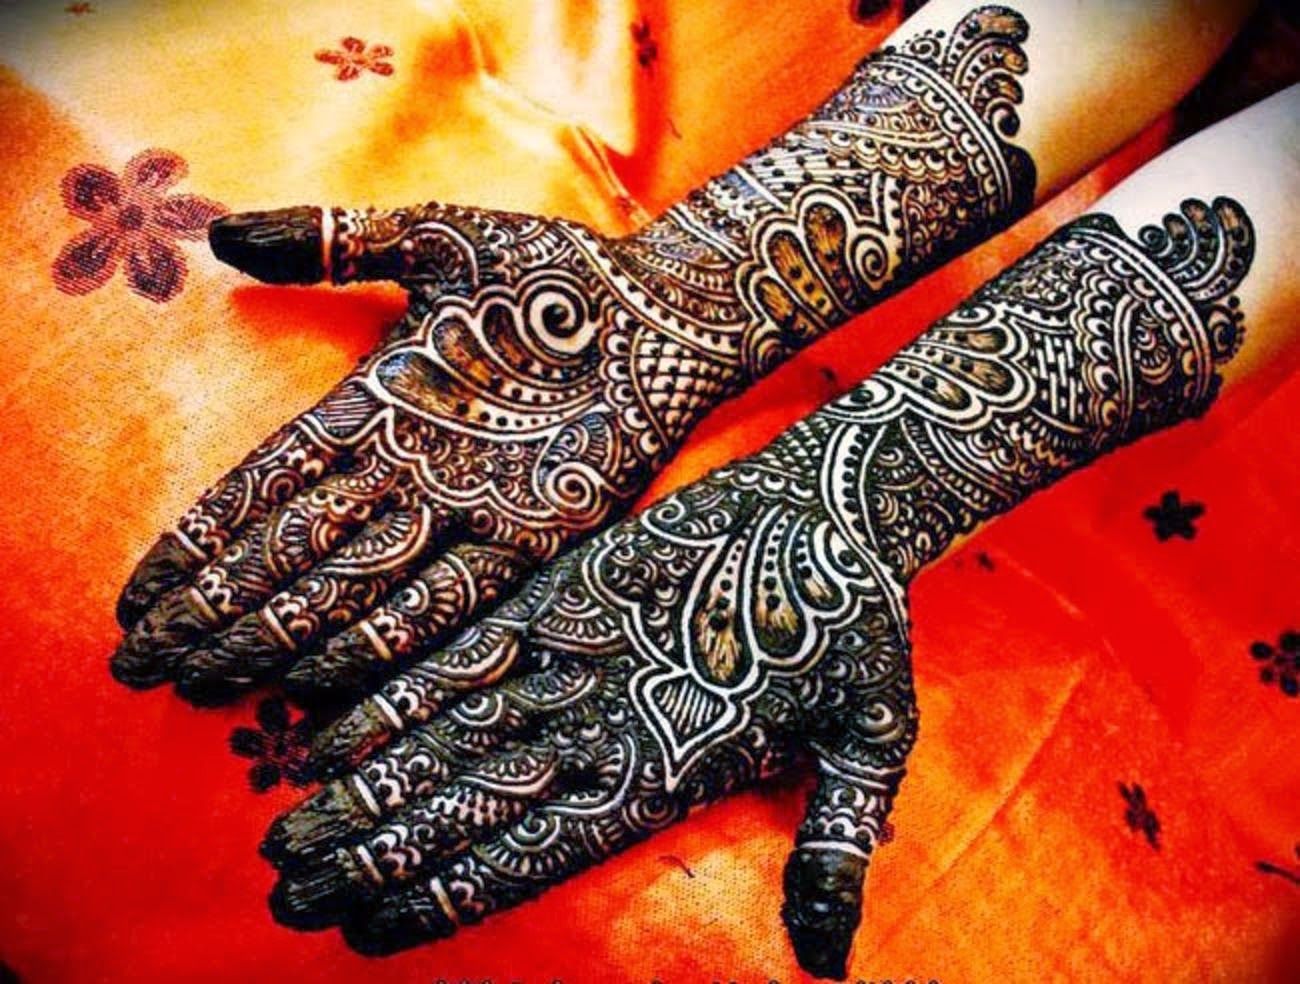 Astonishing Collection of Full 4K Mehndi Design Images - Over 999 Available  for Free Download in HD